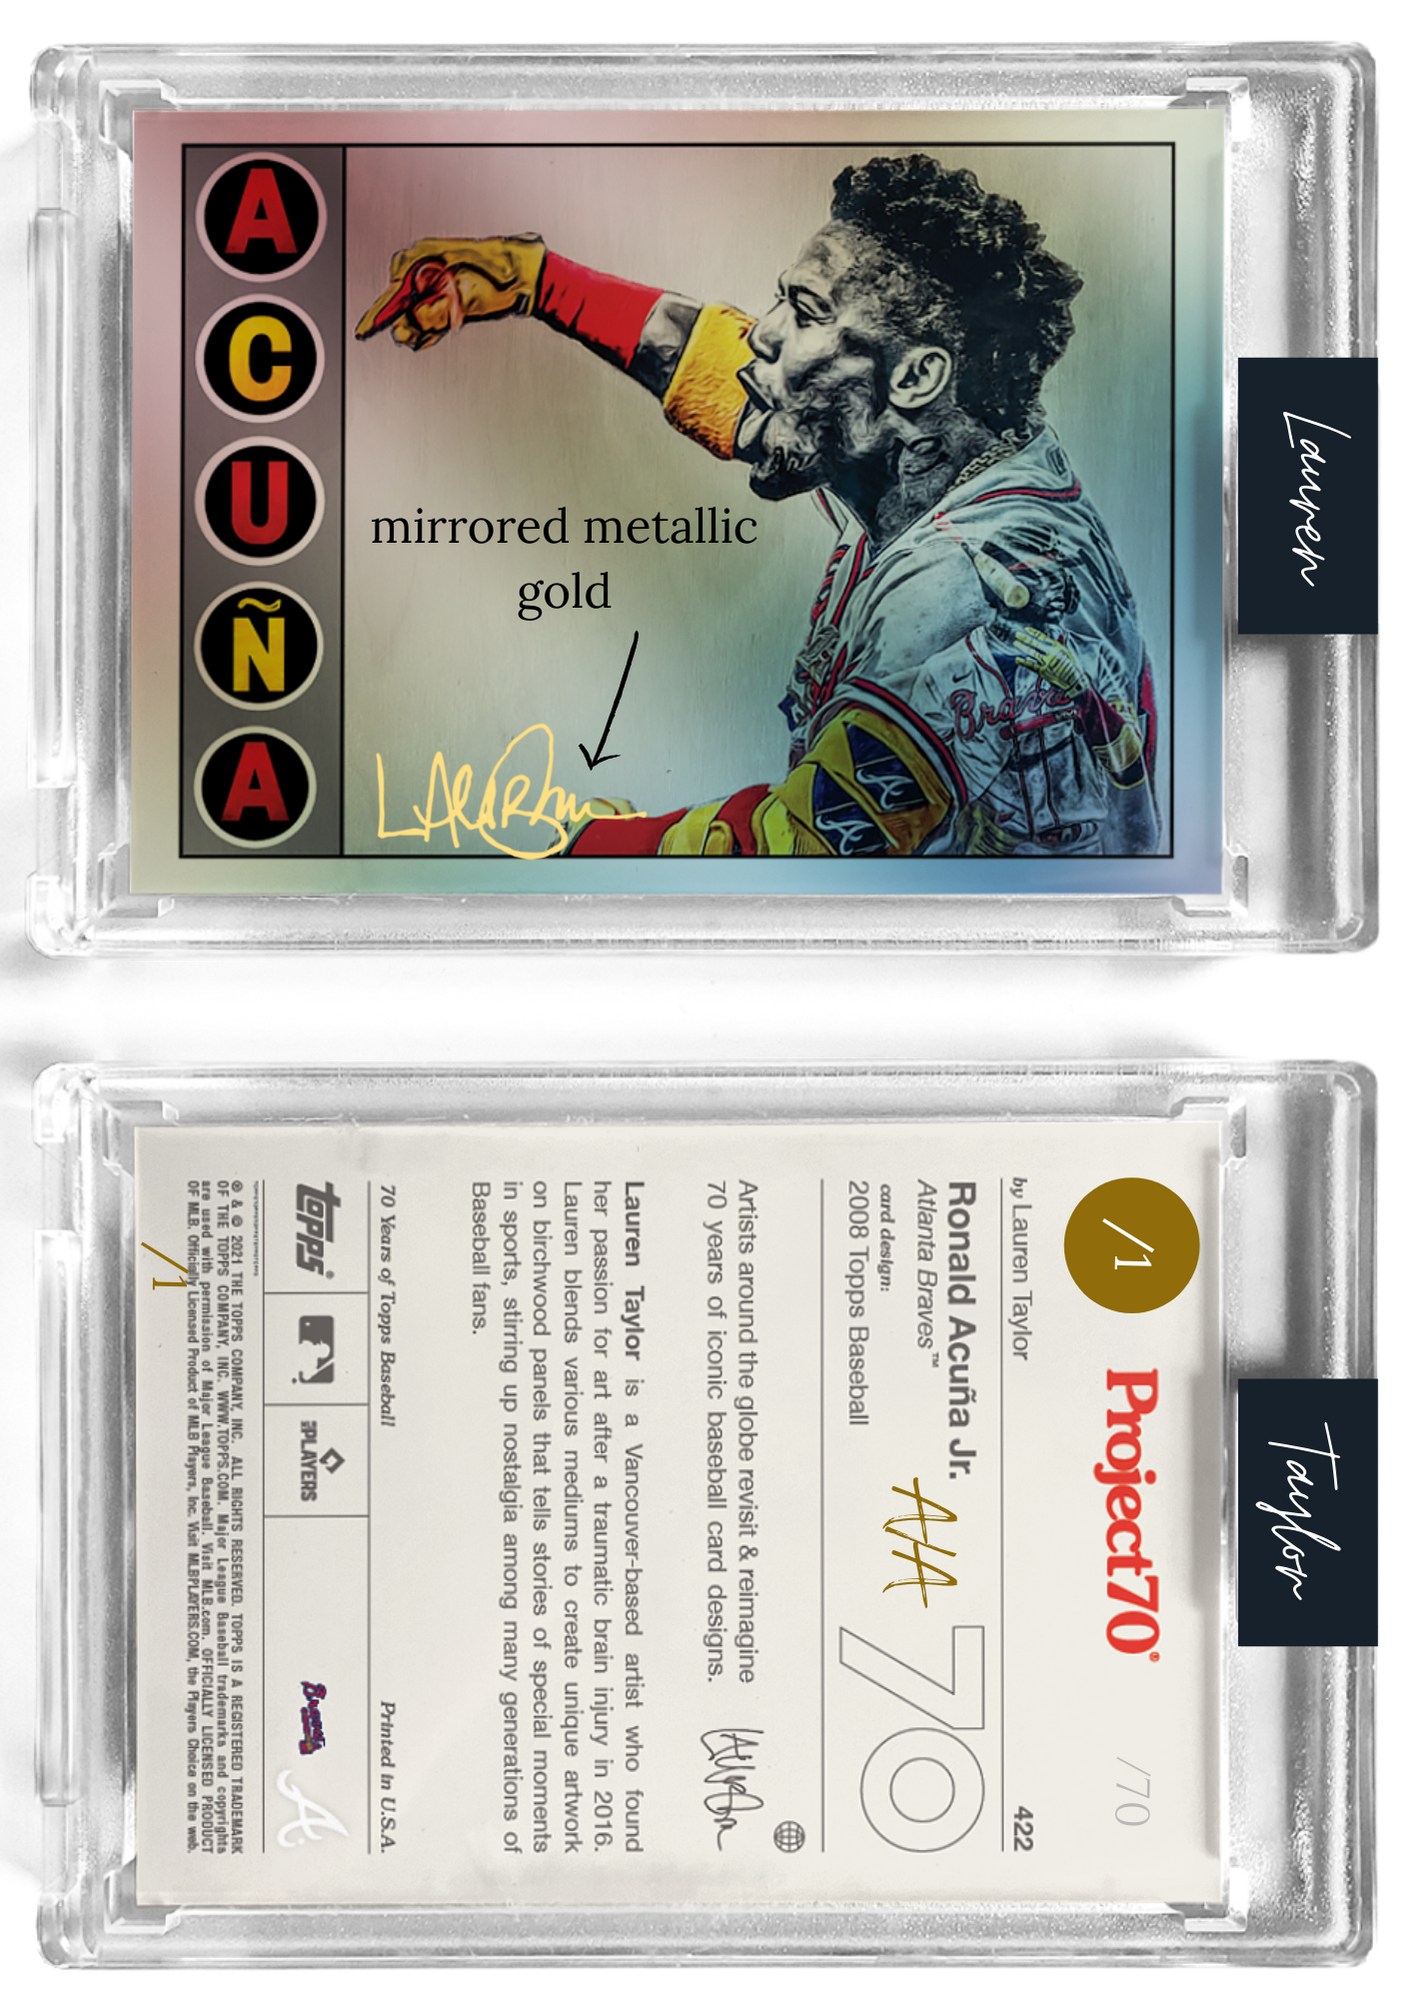 /1 Gold Metallic Artist Signature - FOIL VARIANT Topps Project 70 130pt card #422 by Lauren Taylor - Ronald Acuña Jr.